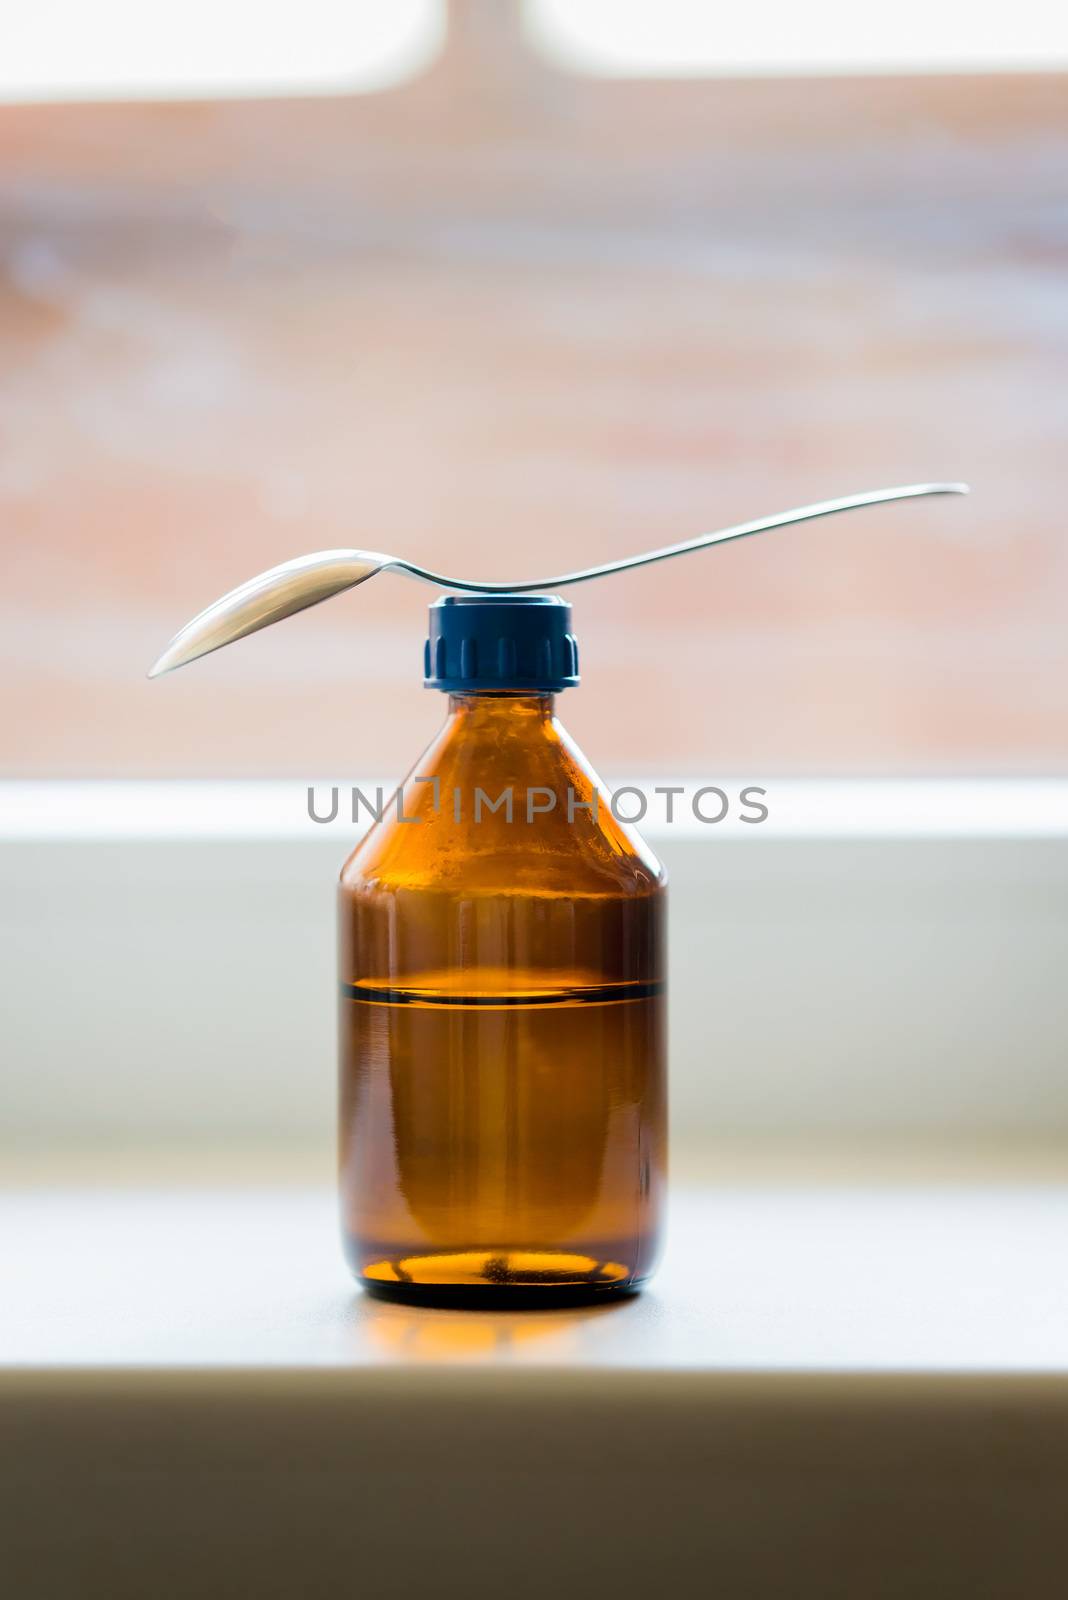 A cough syrup bottle with a spoon close to the window